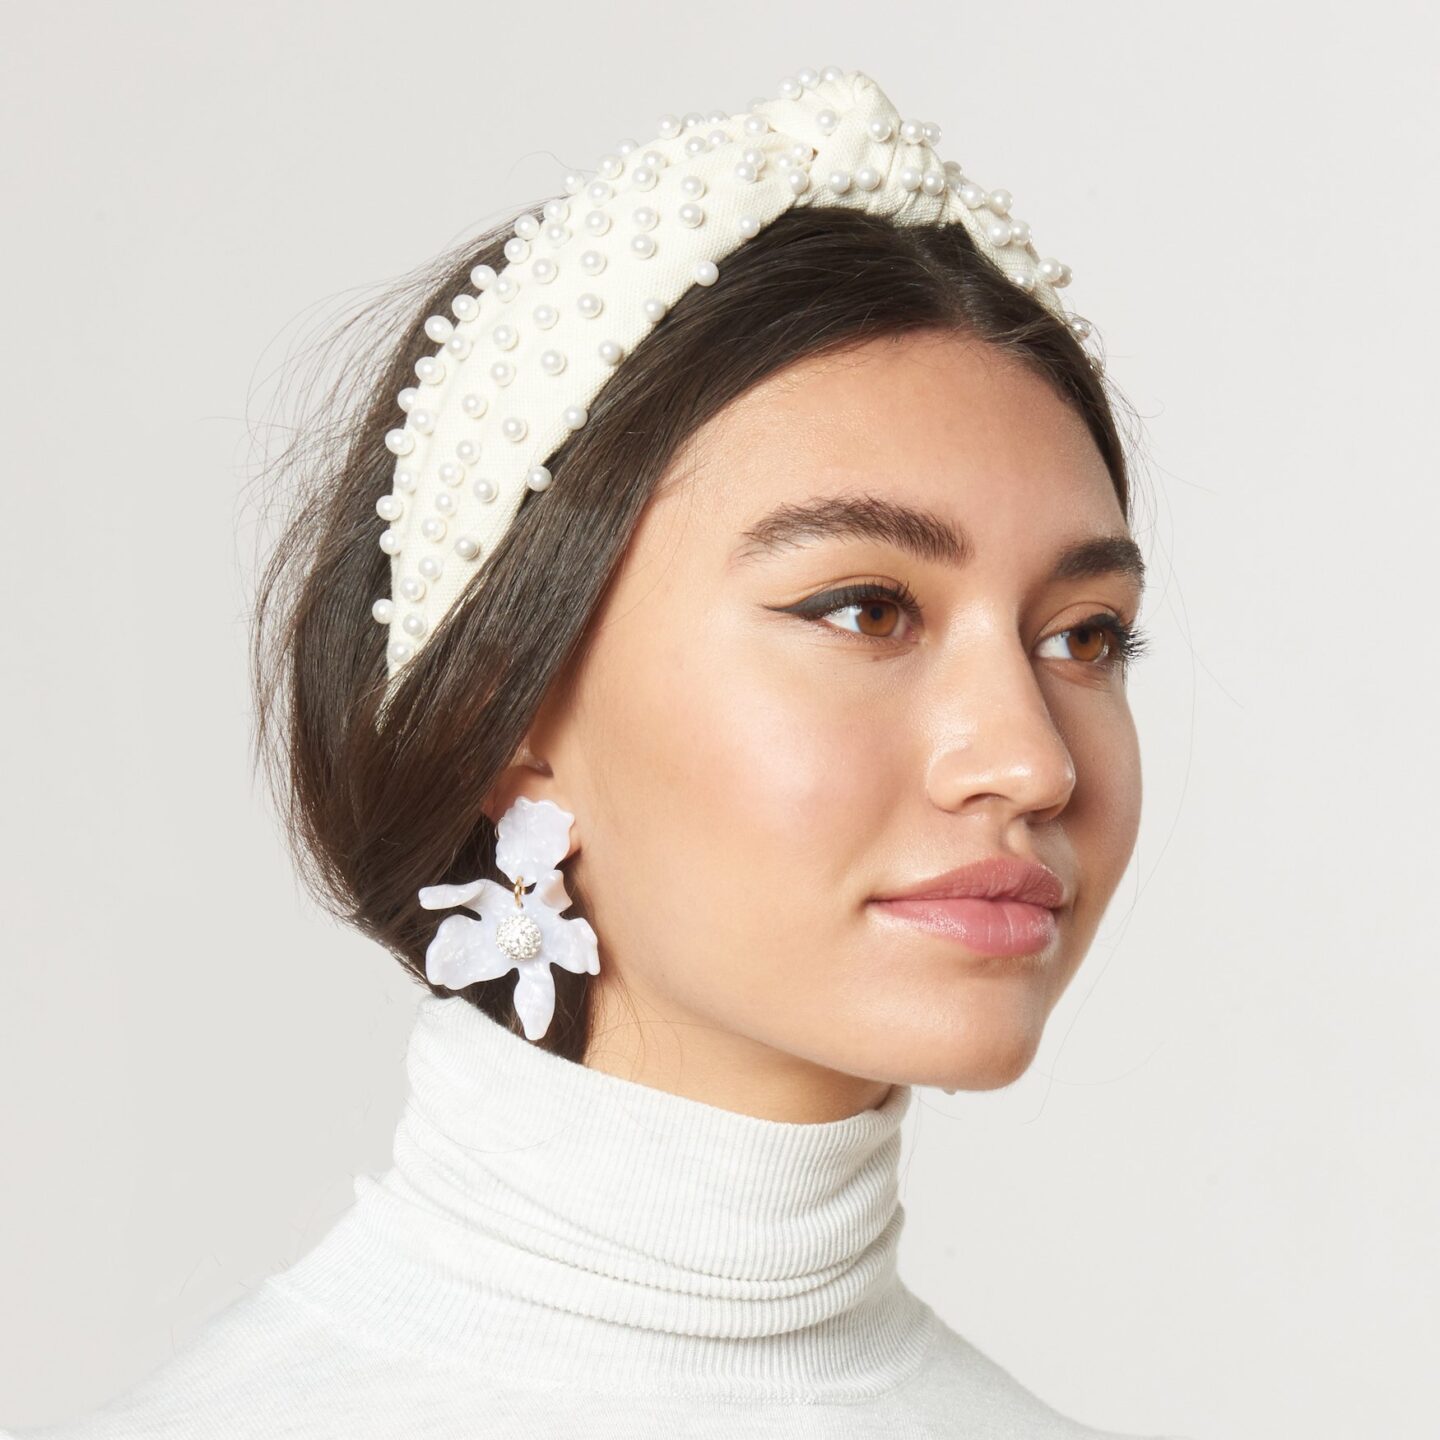 woman wearing white headband with pearls